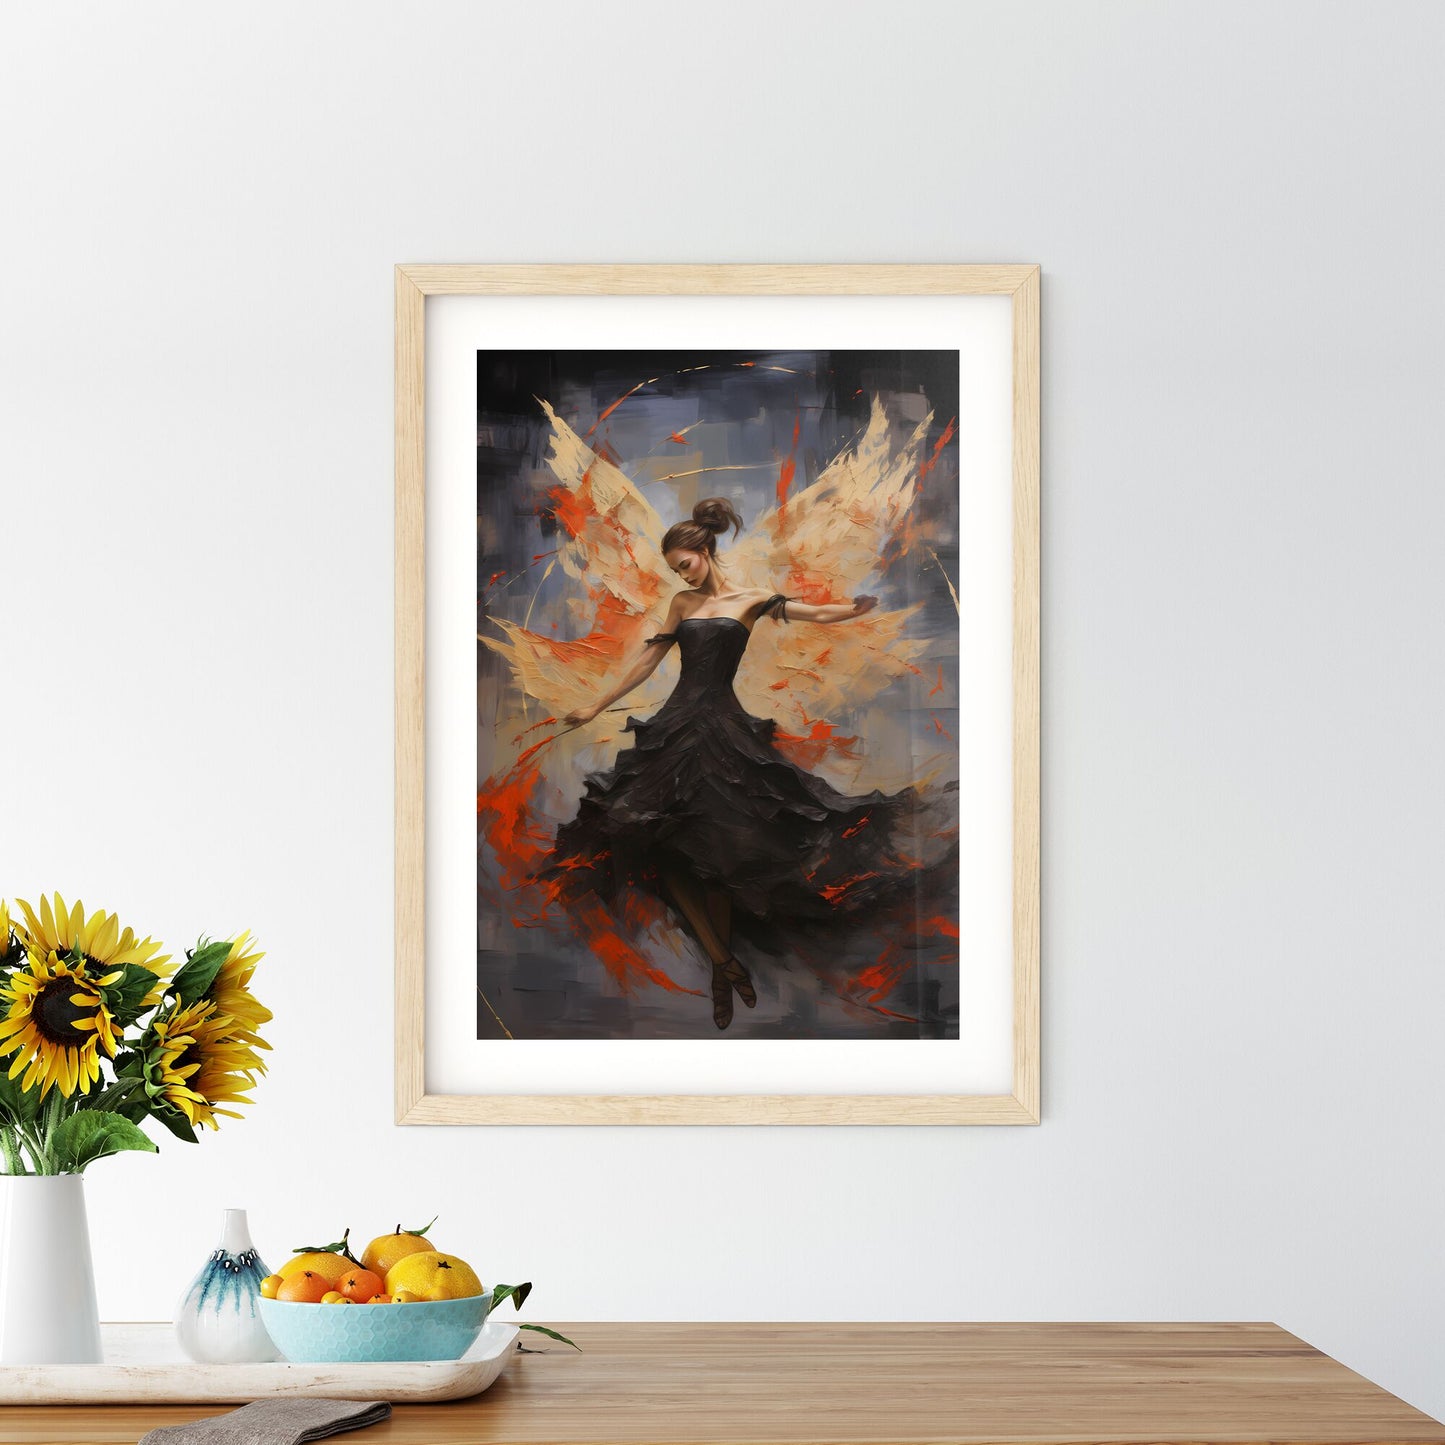 A Woman In A Black Dress With Orange Wings Default Title